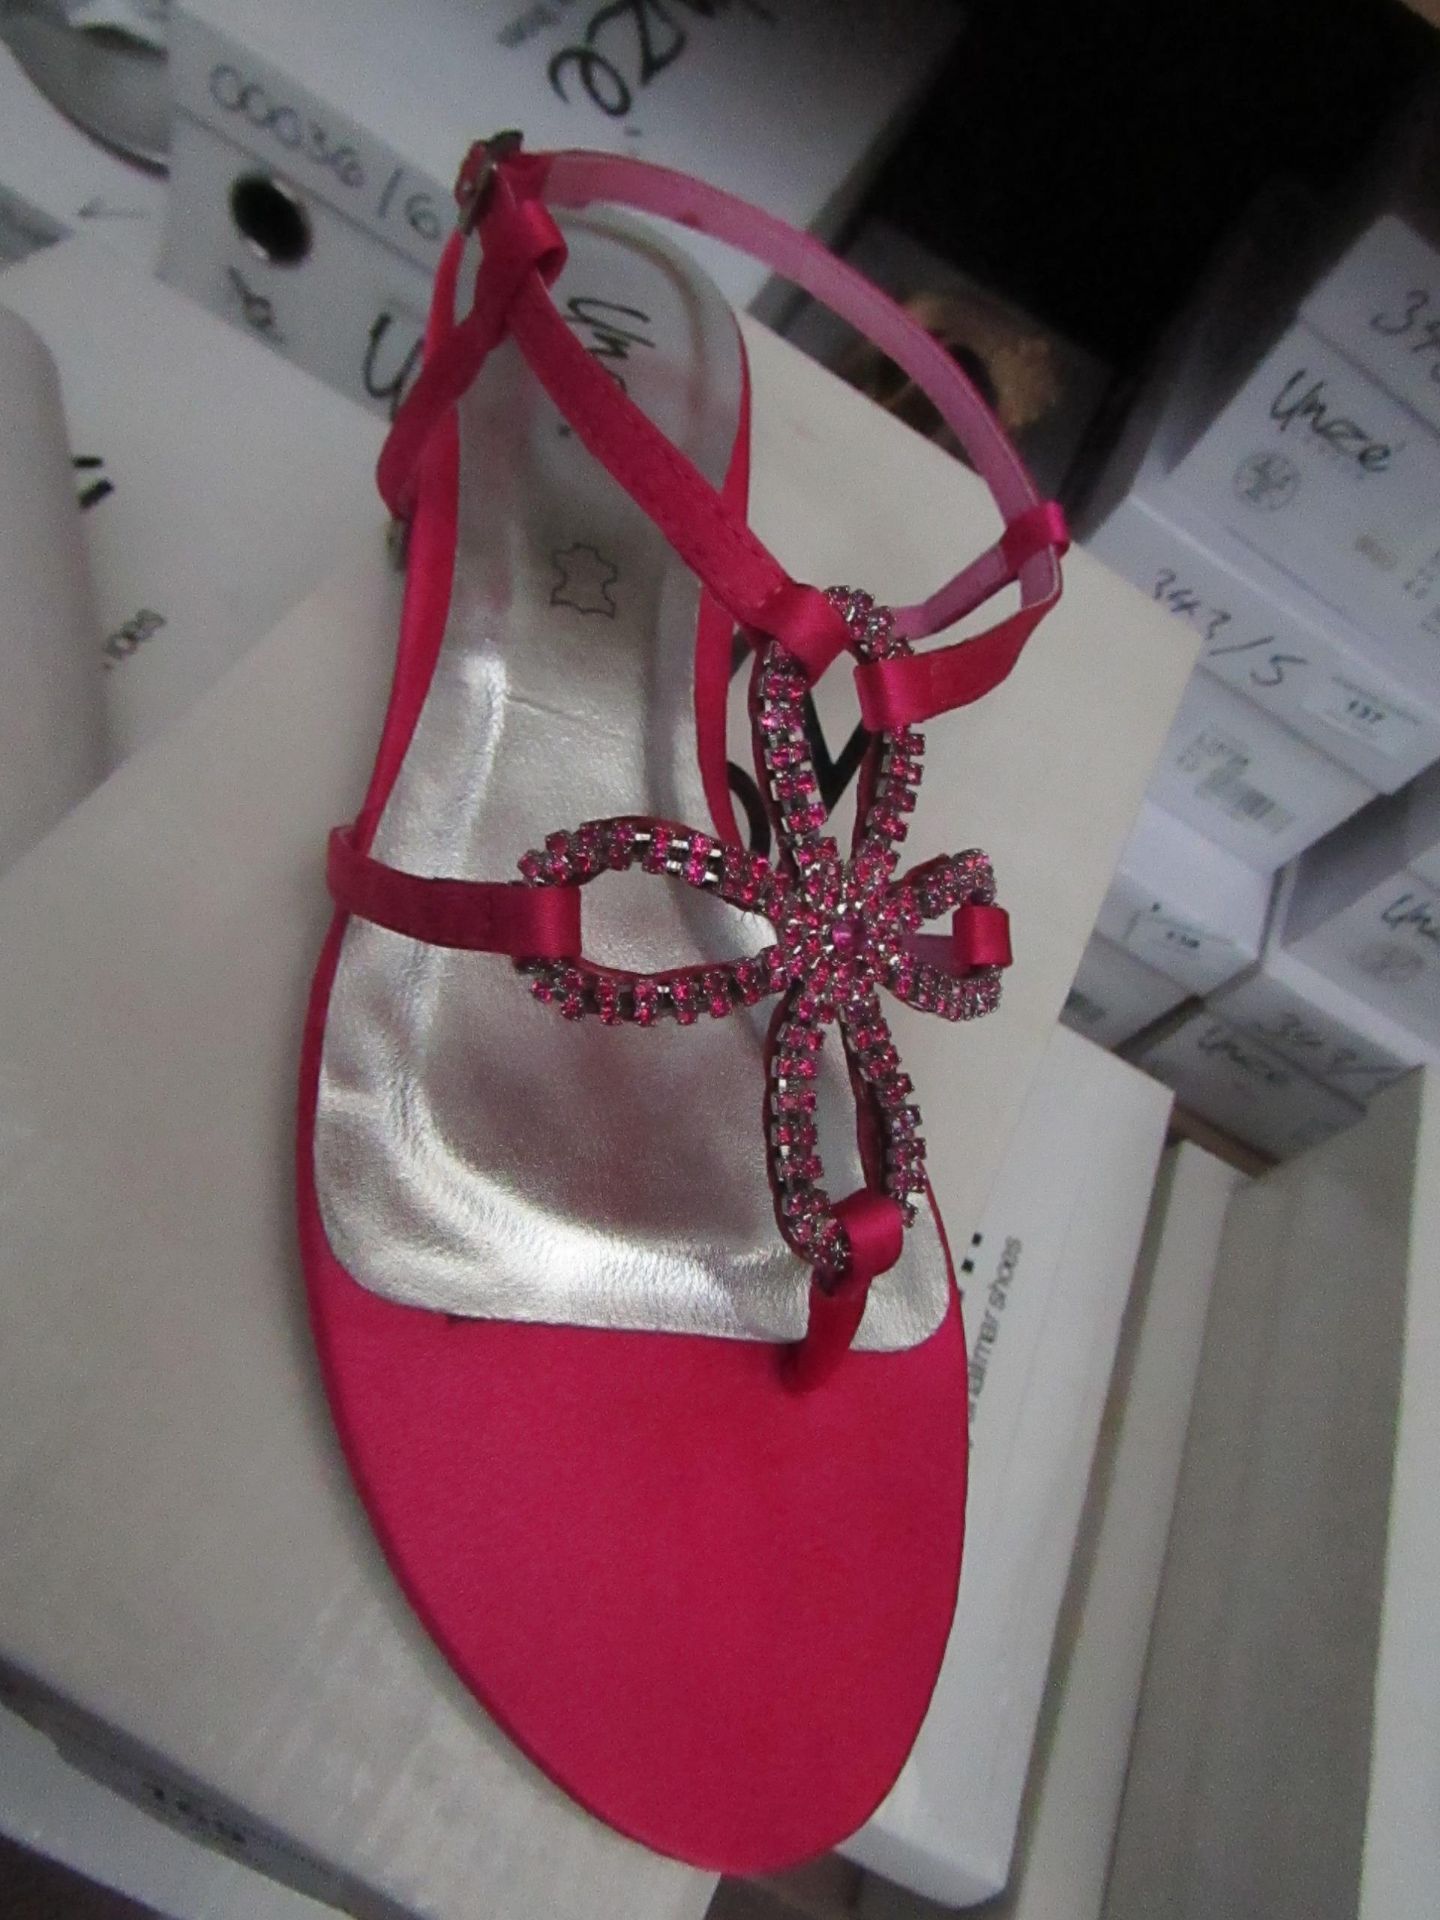 Unze by Shalamar Shoes Ladies Fuschia & Embelished Shoes size 5 new & boxed see image for design